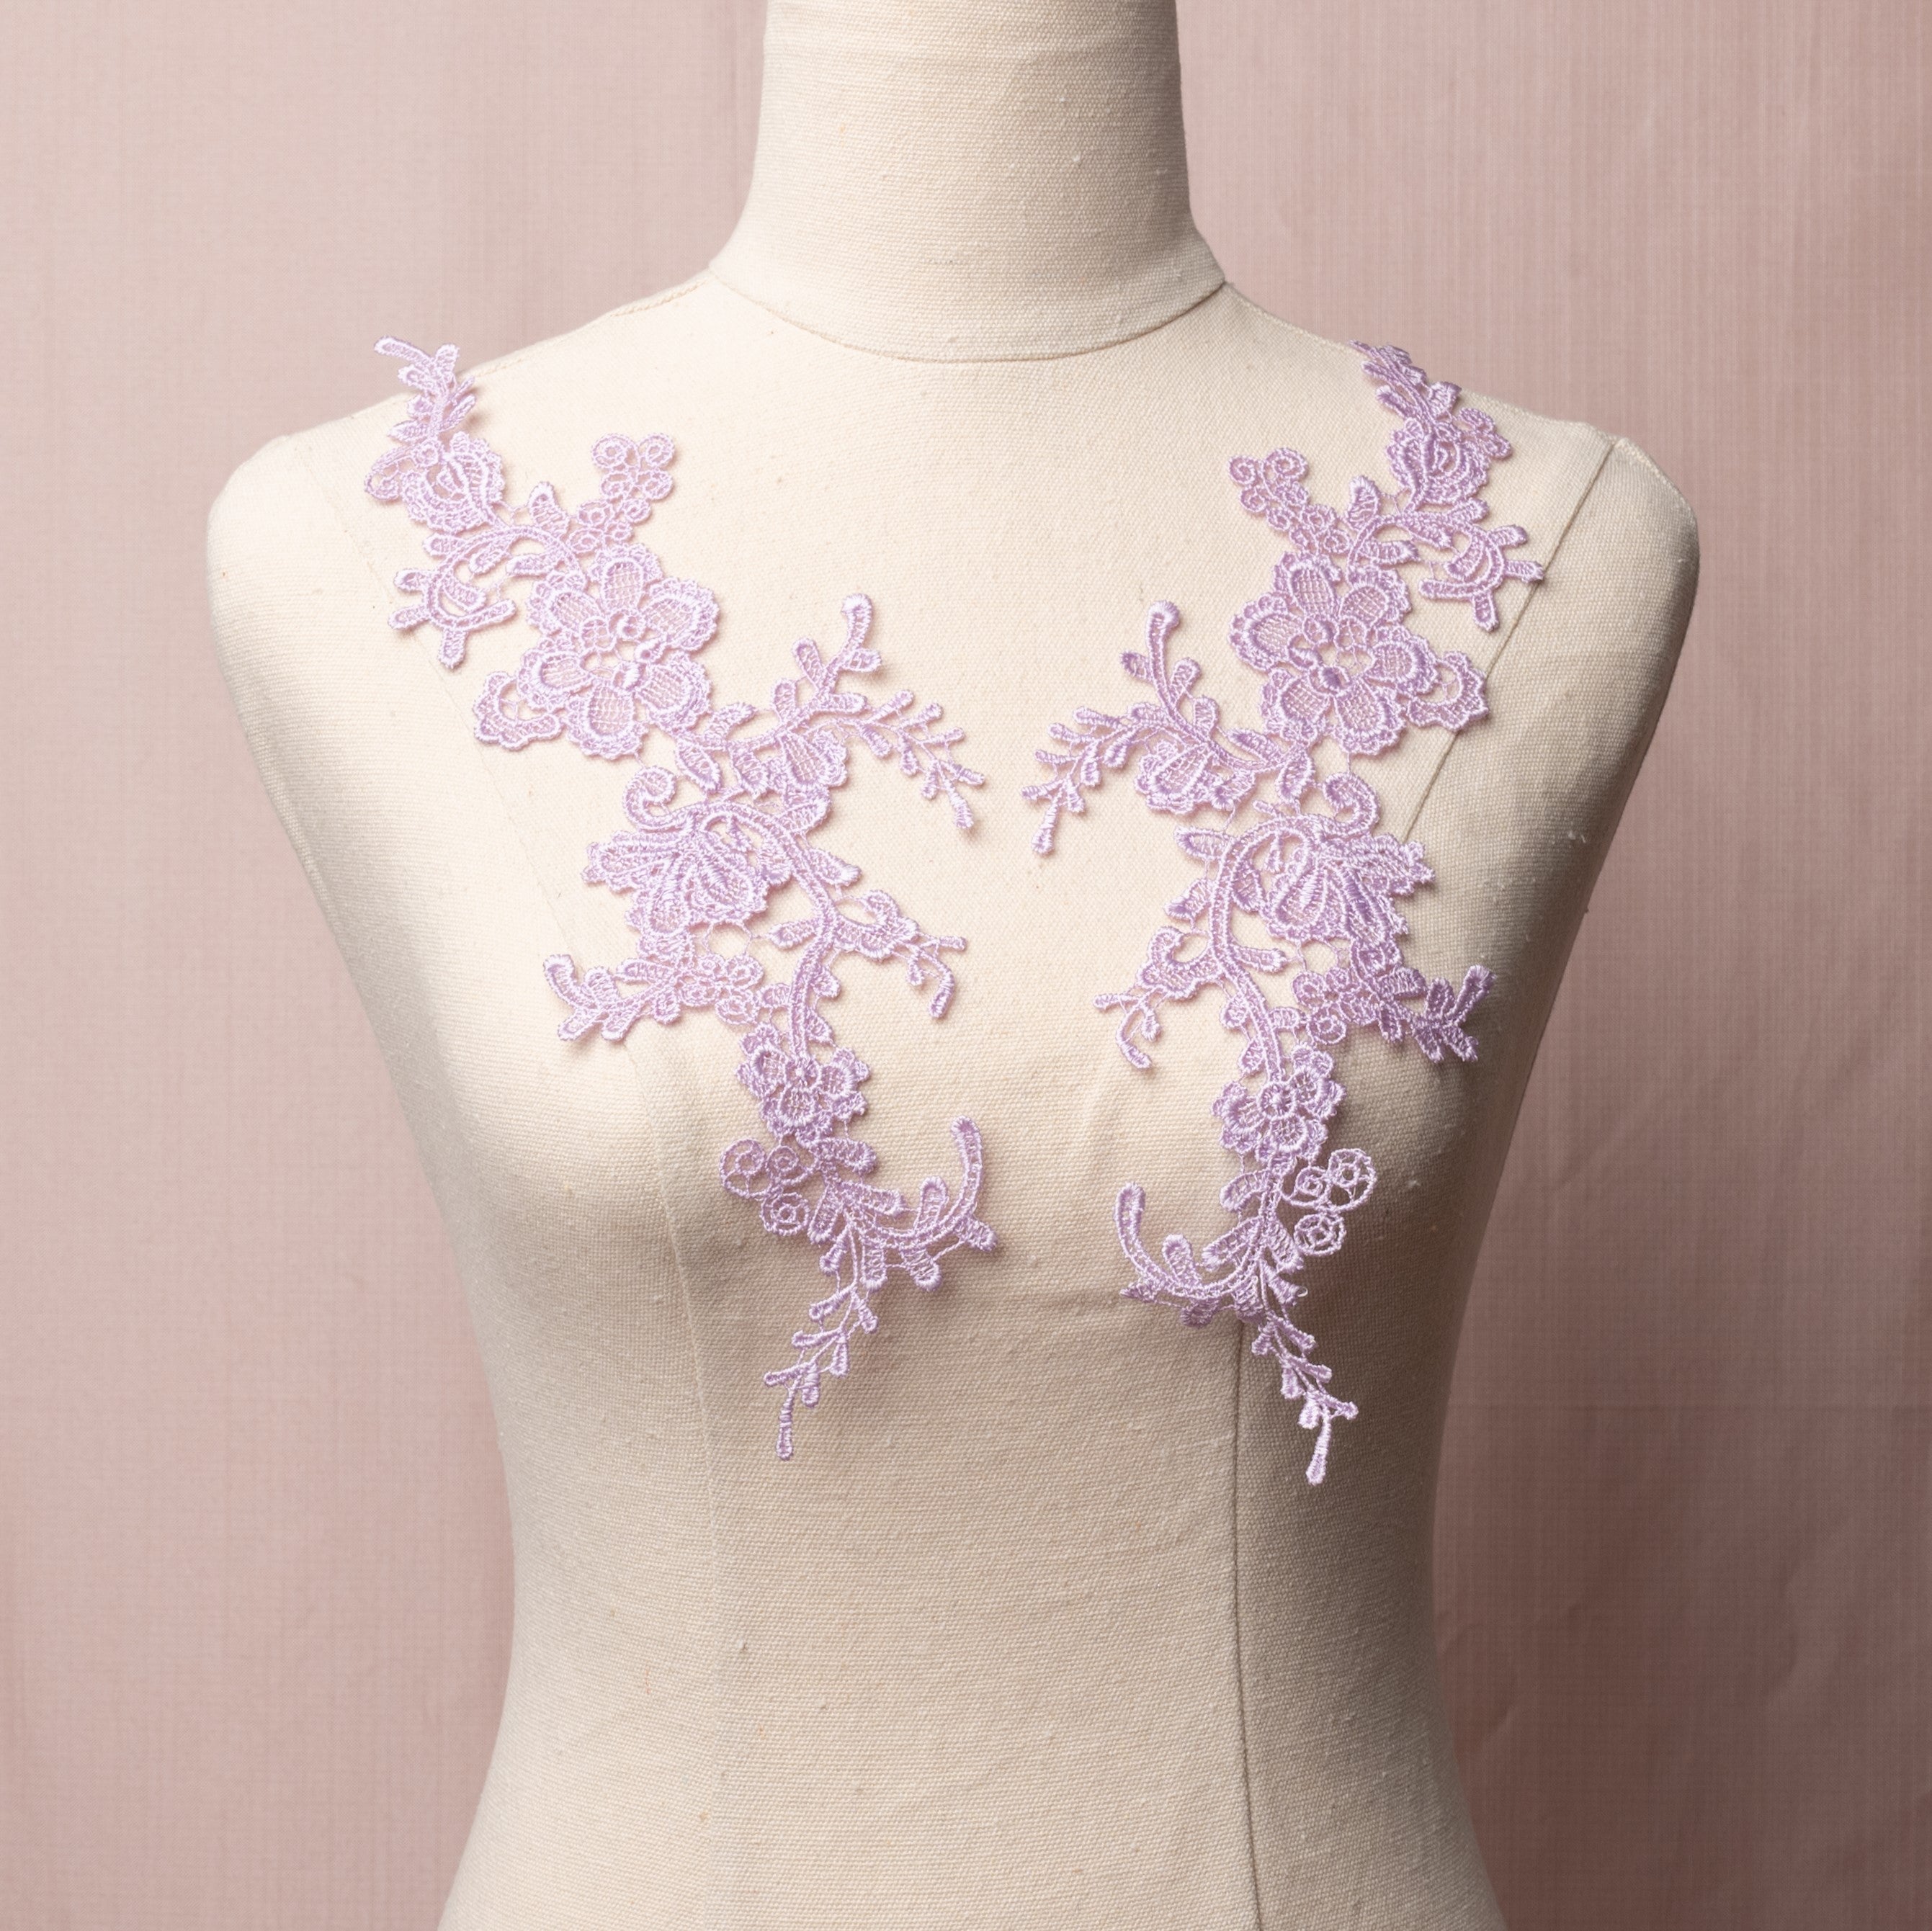 Heavily embroidered lilac floral applique pair displayed on a mannequin.